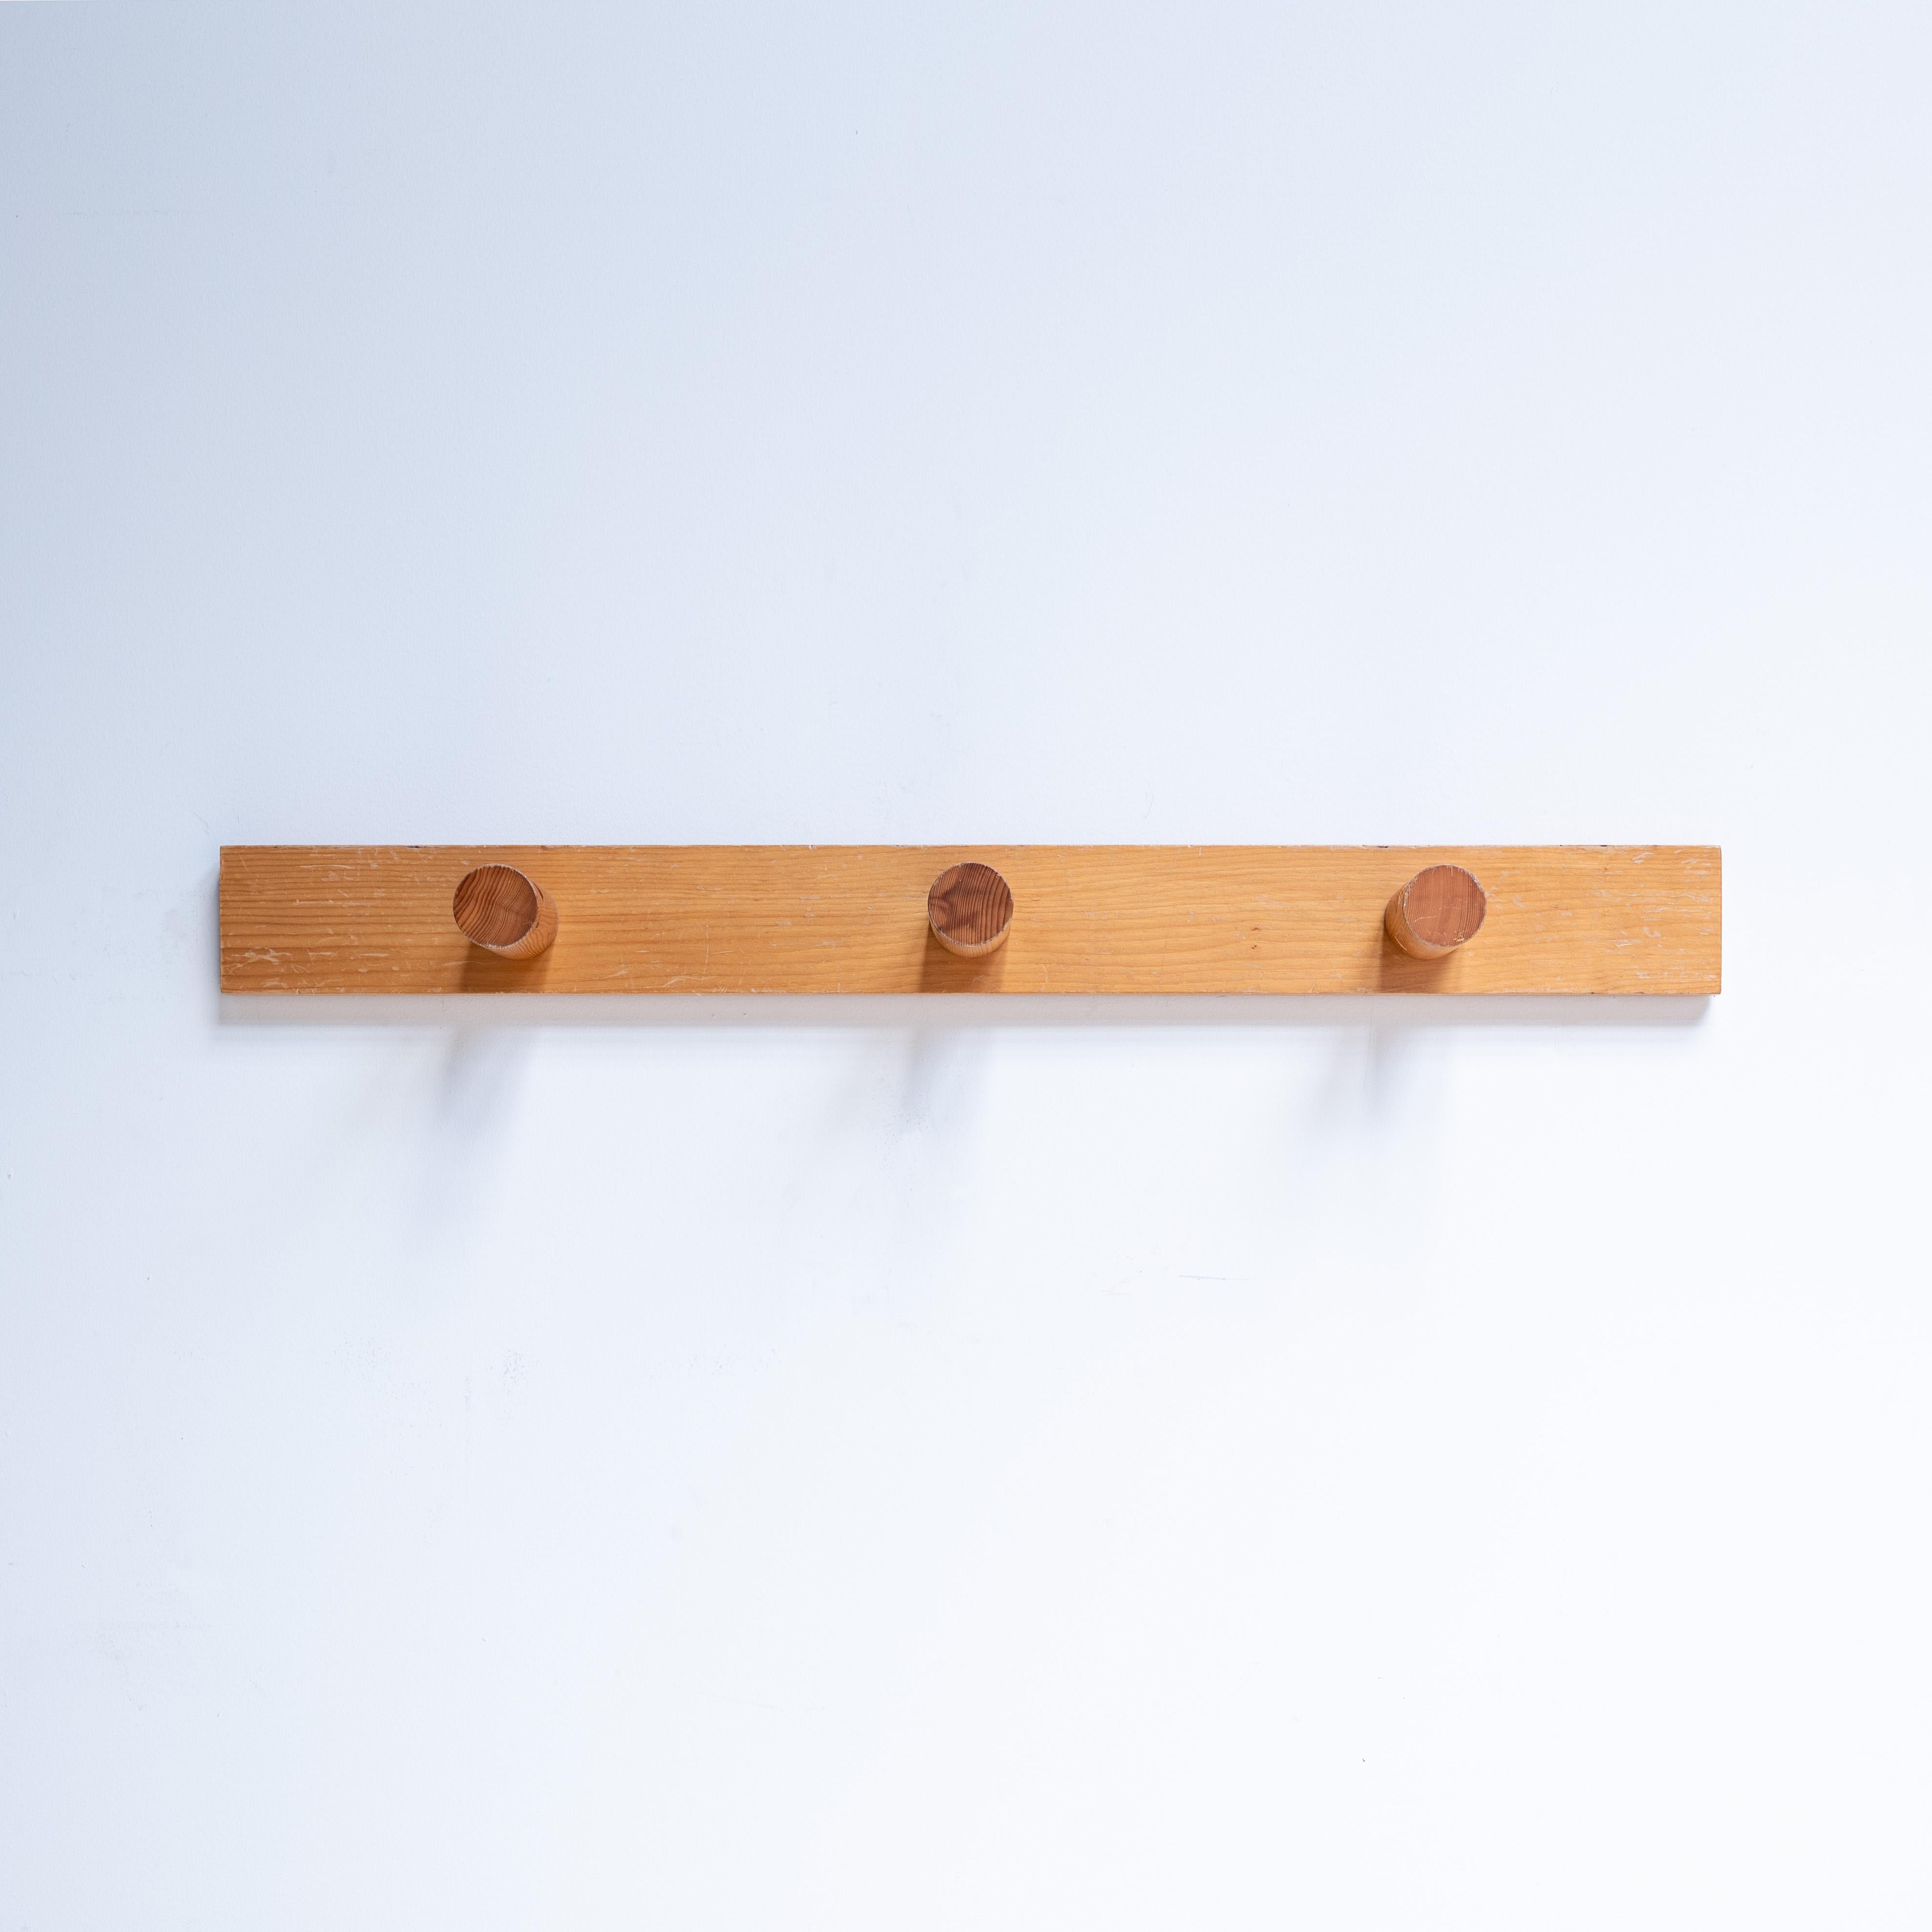 A coat rack with three hooks designed by Charlotte Perriand for Les Arcs ski resort in France. Made in 1970s. Pine solid wood. 
It's in excellent vintage condition with minor wear consistent with age and use.
Distance between the mounting points: